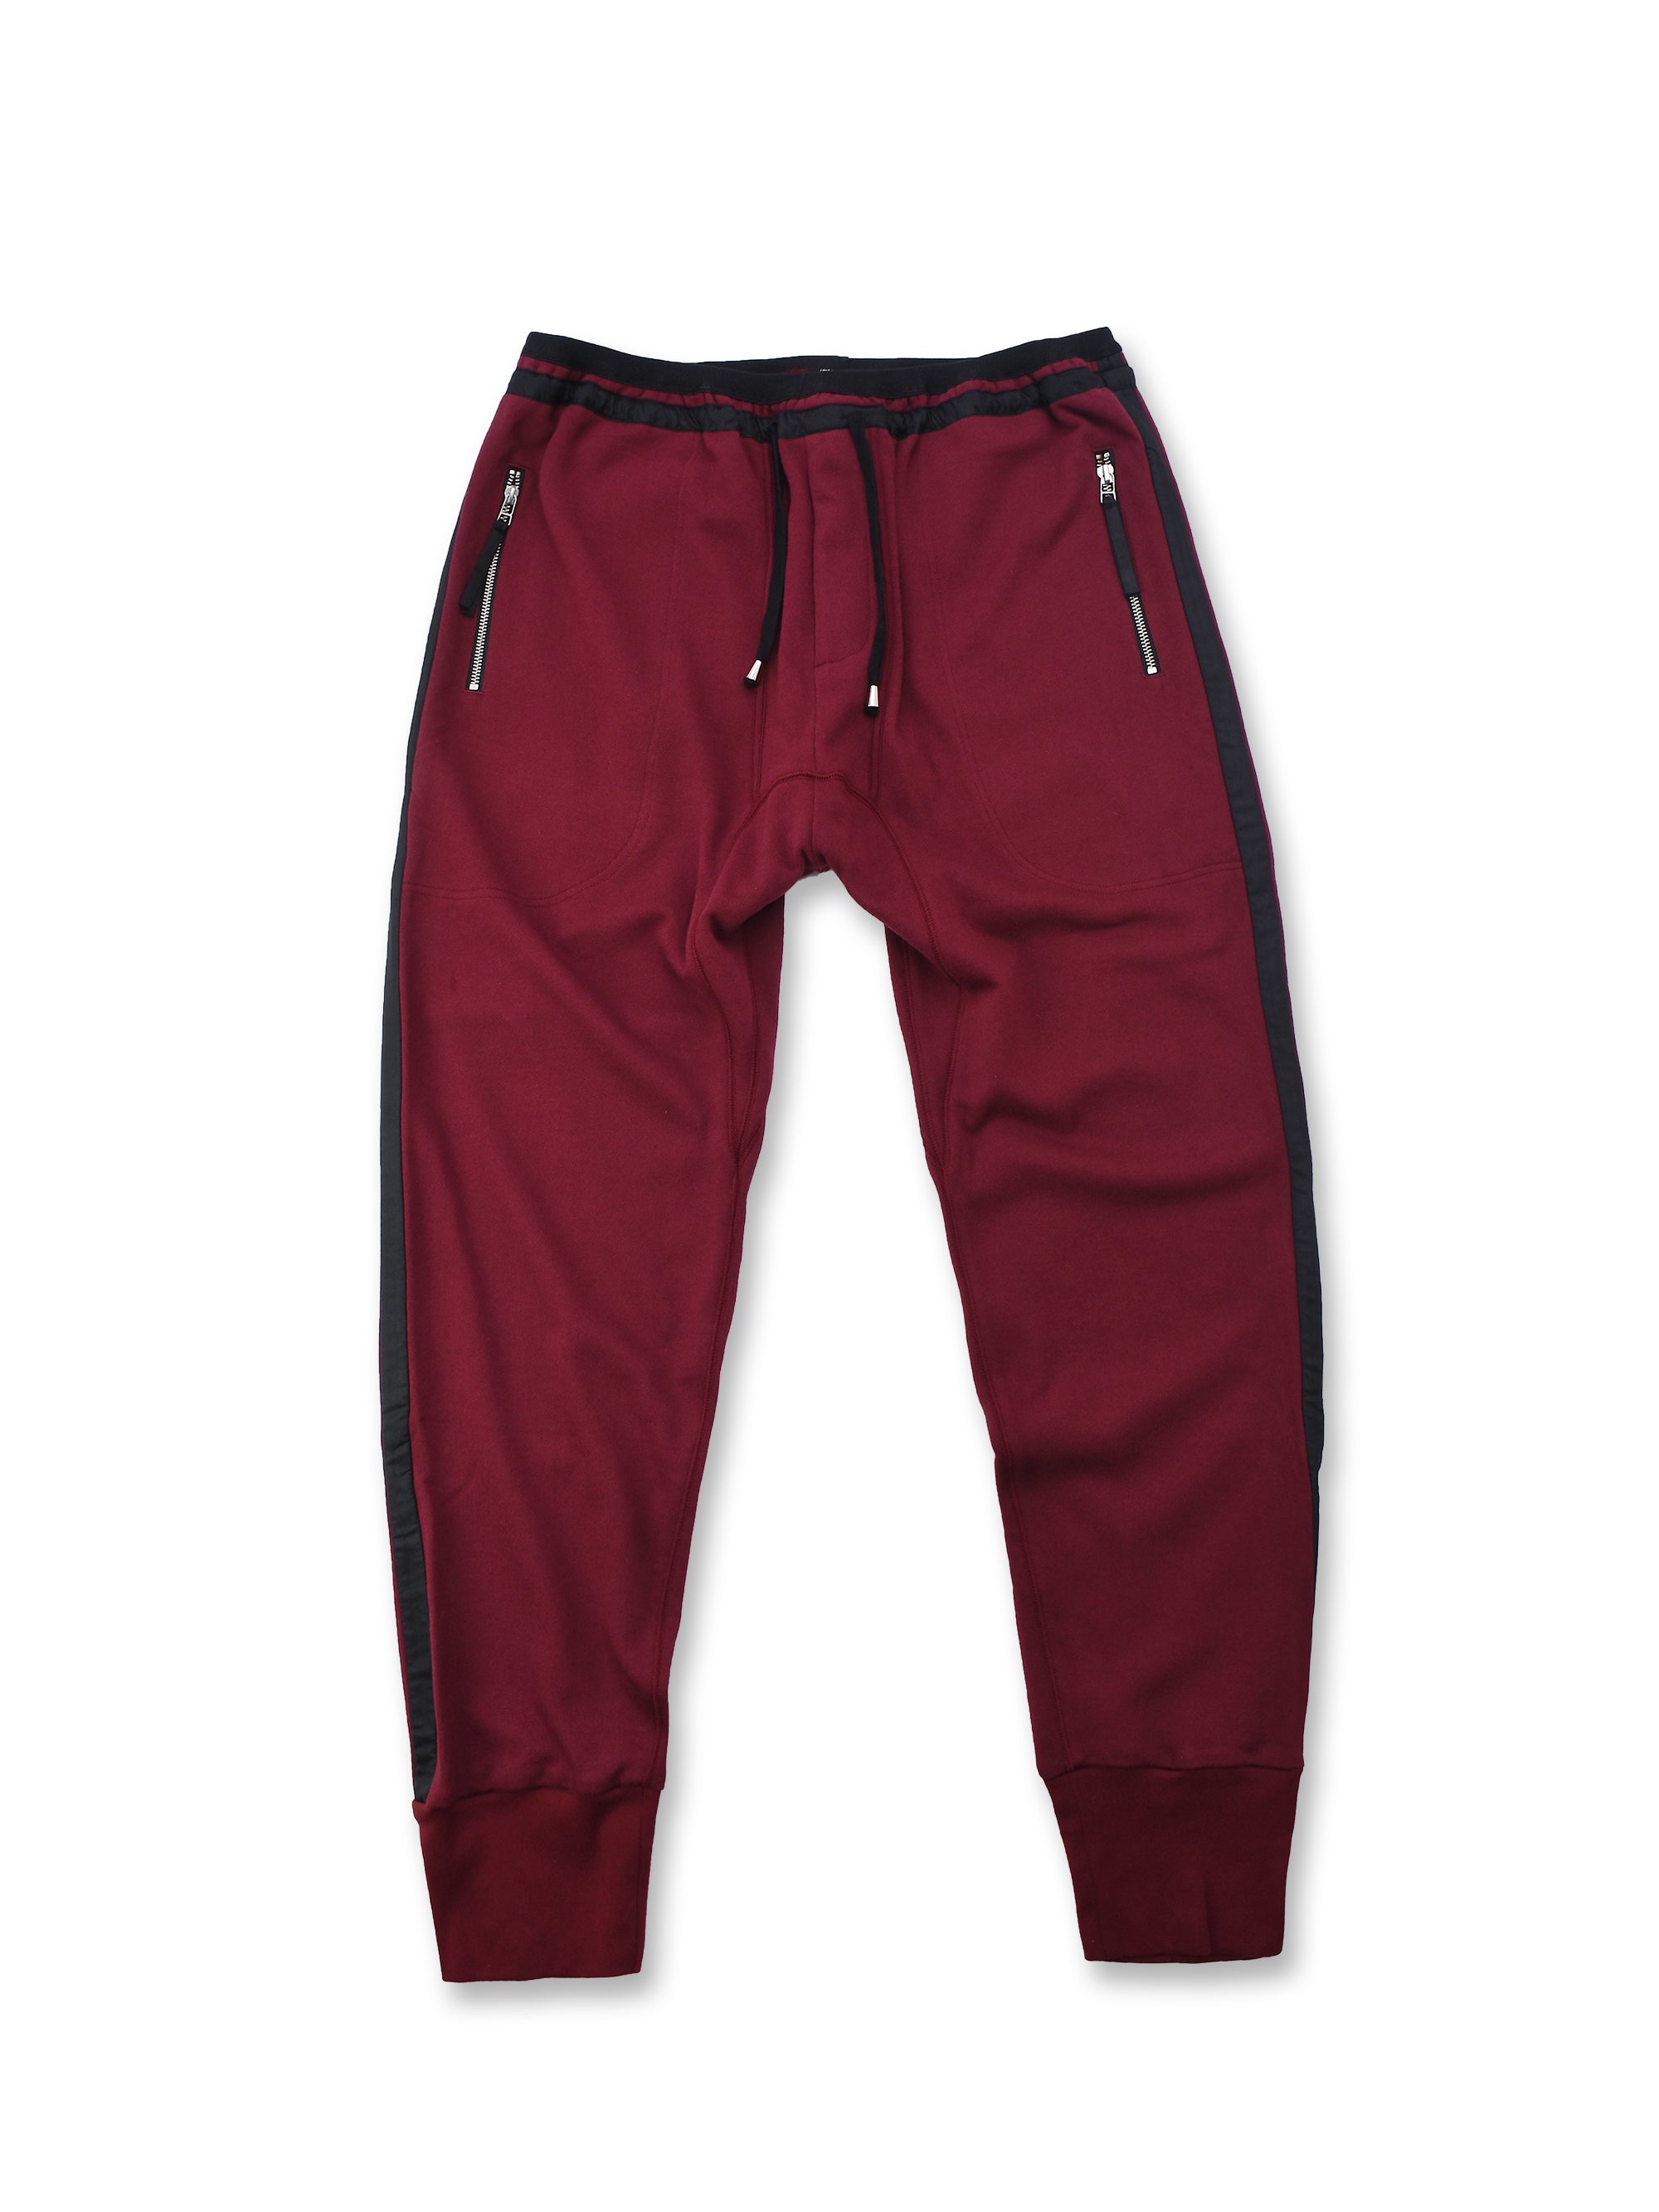 WINE AND BLACK SATIN STRIPED JOGGERS